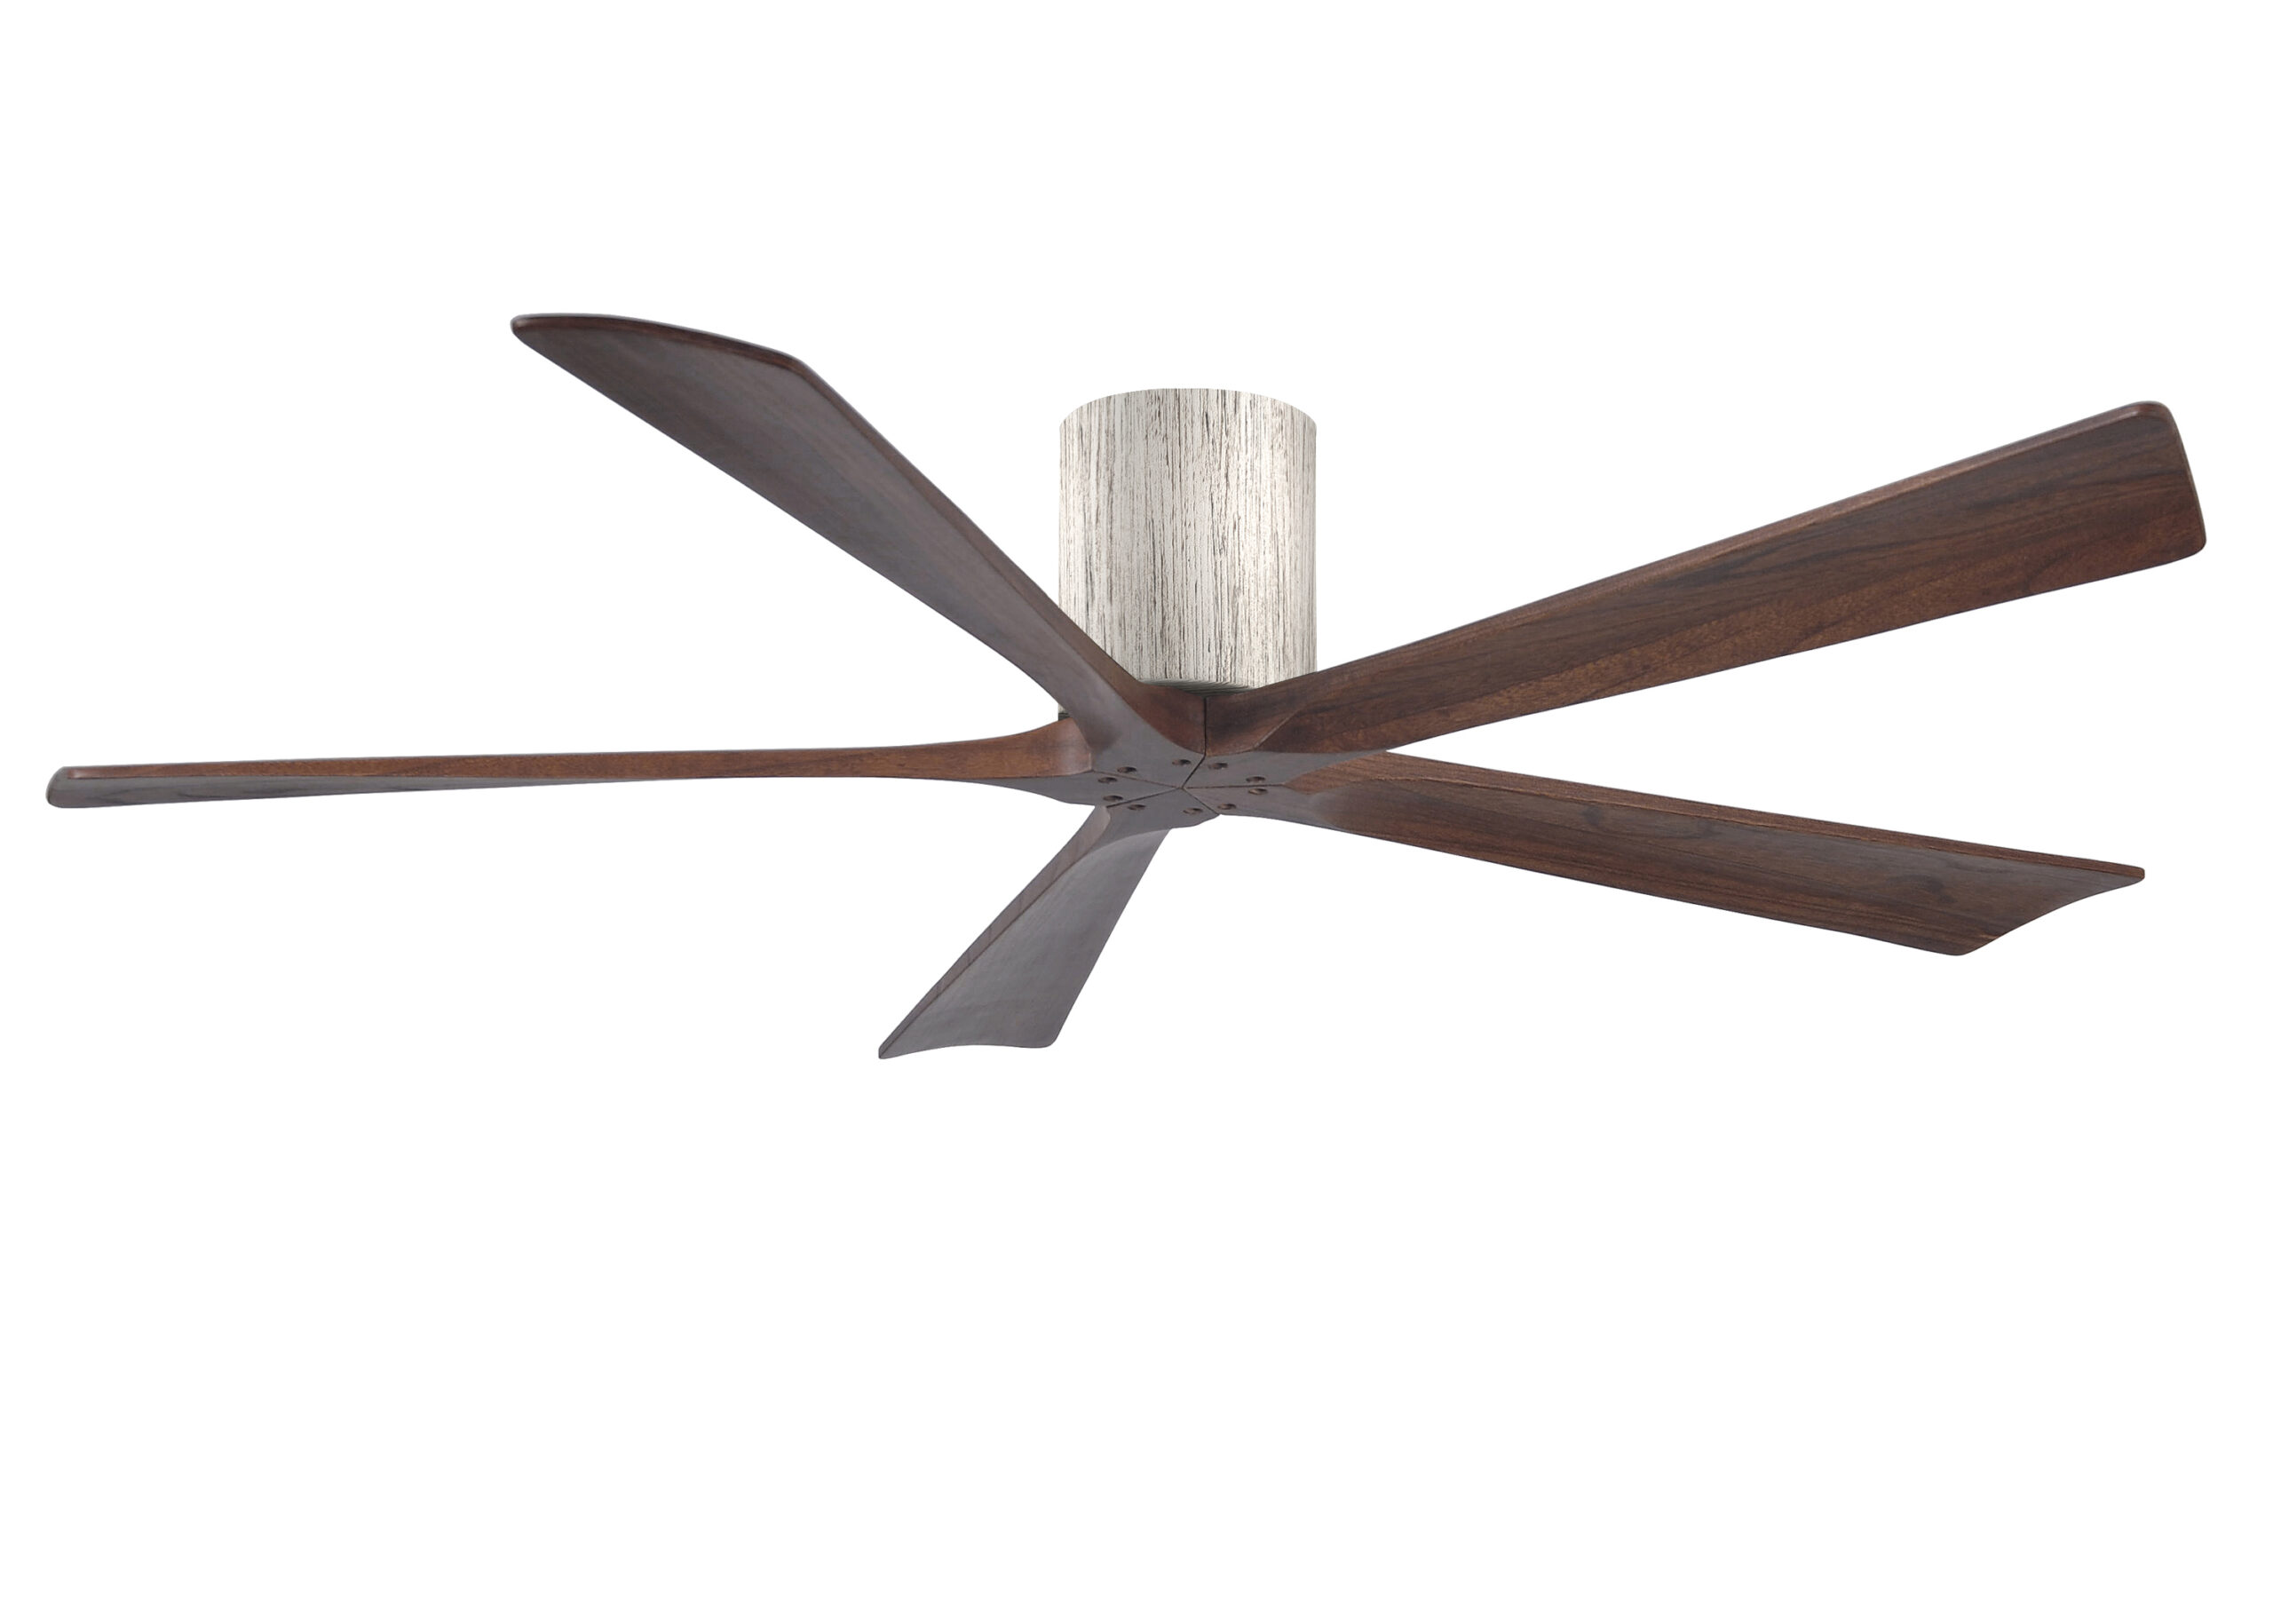 Irene-5H Ceiling Fan in Barn Wood Finish with 60